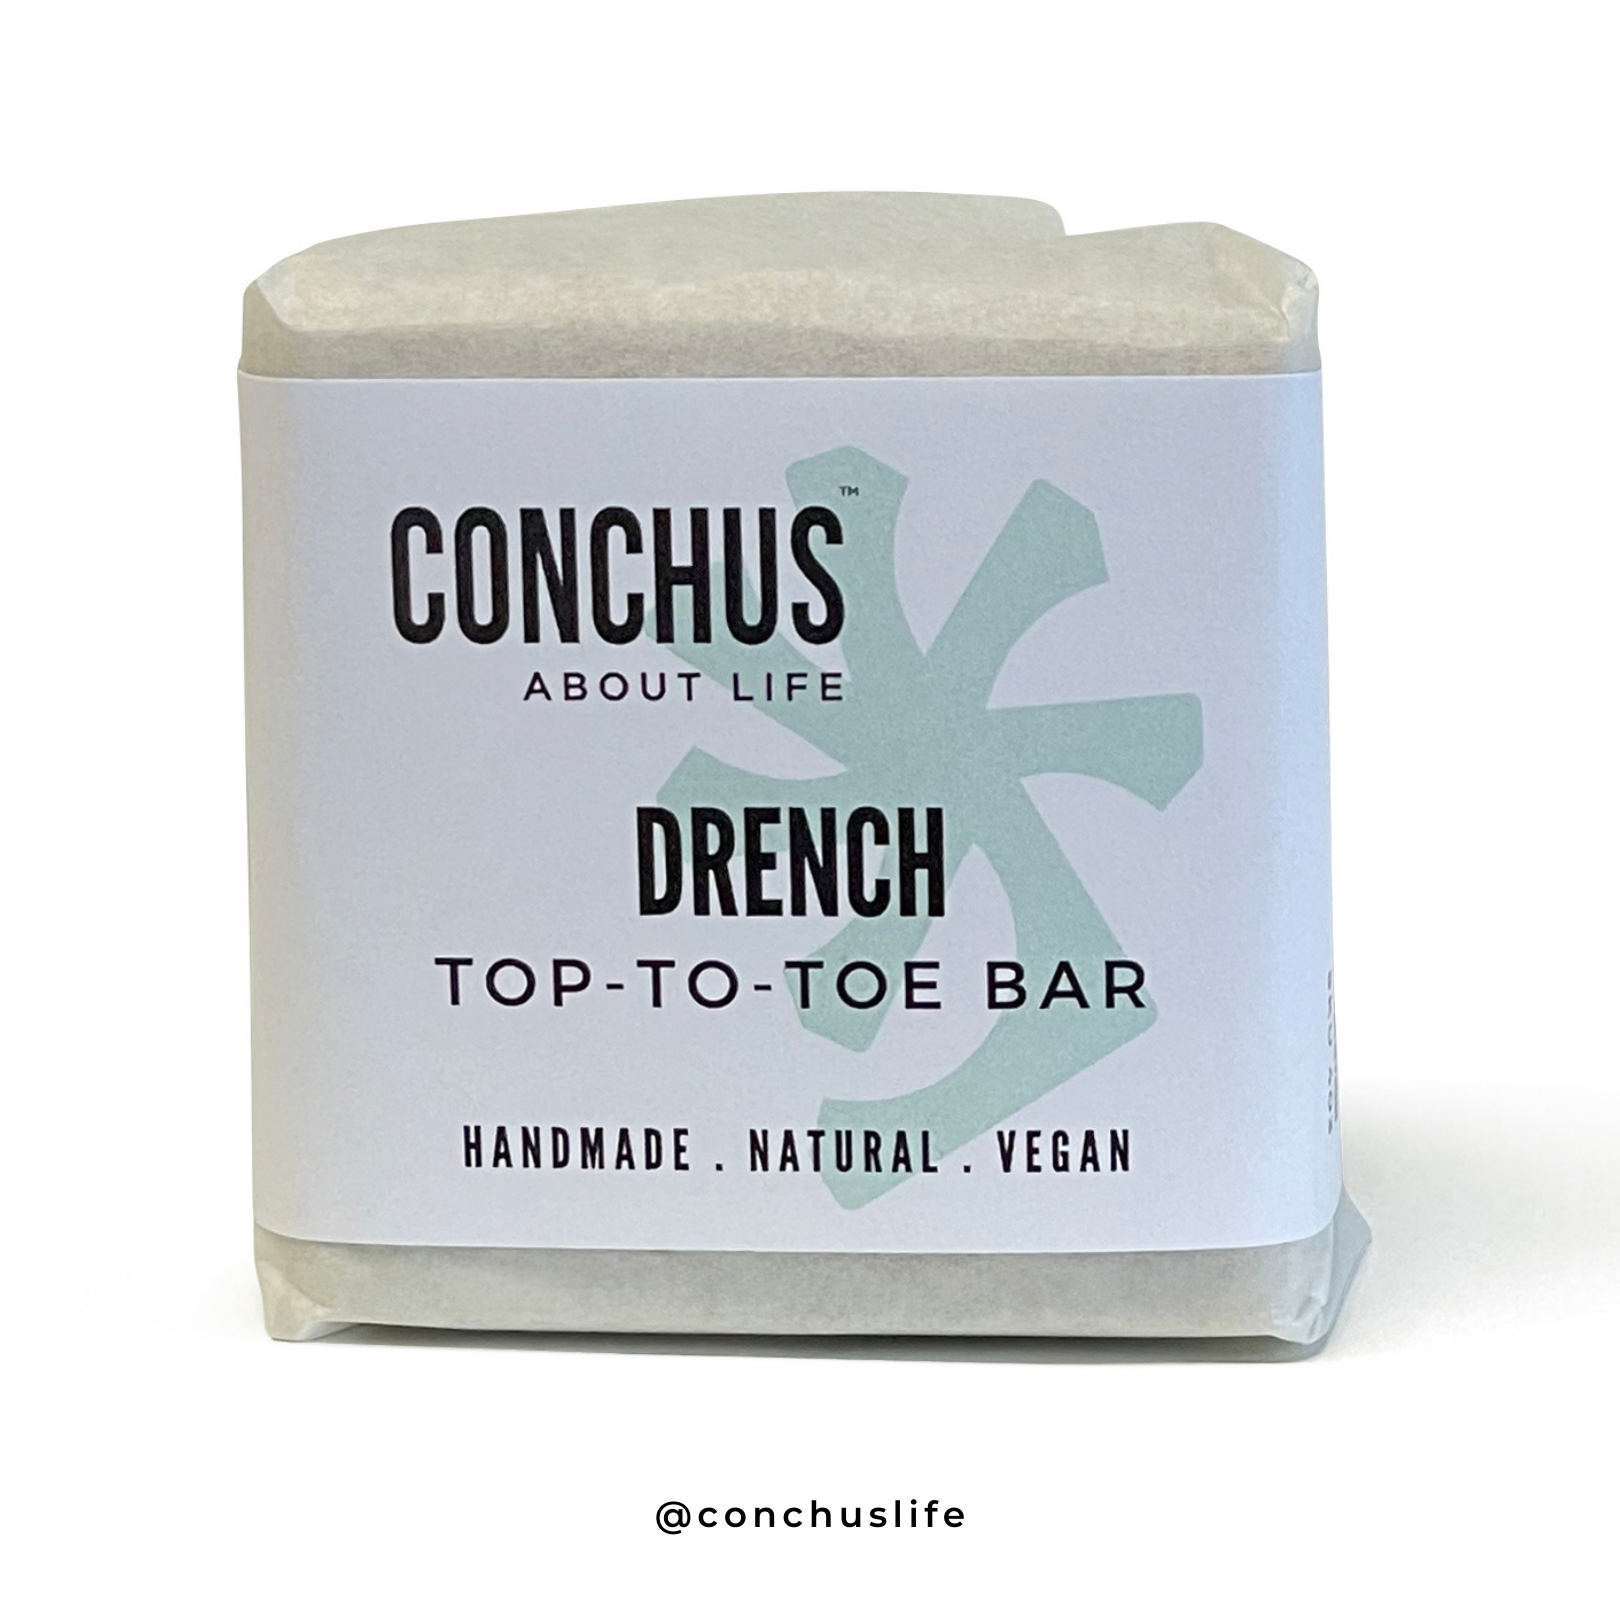 Drench Top to Toe Bar